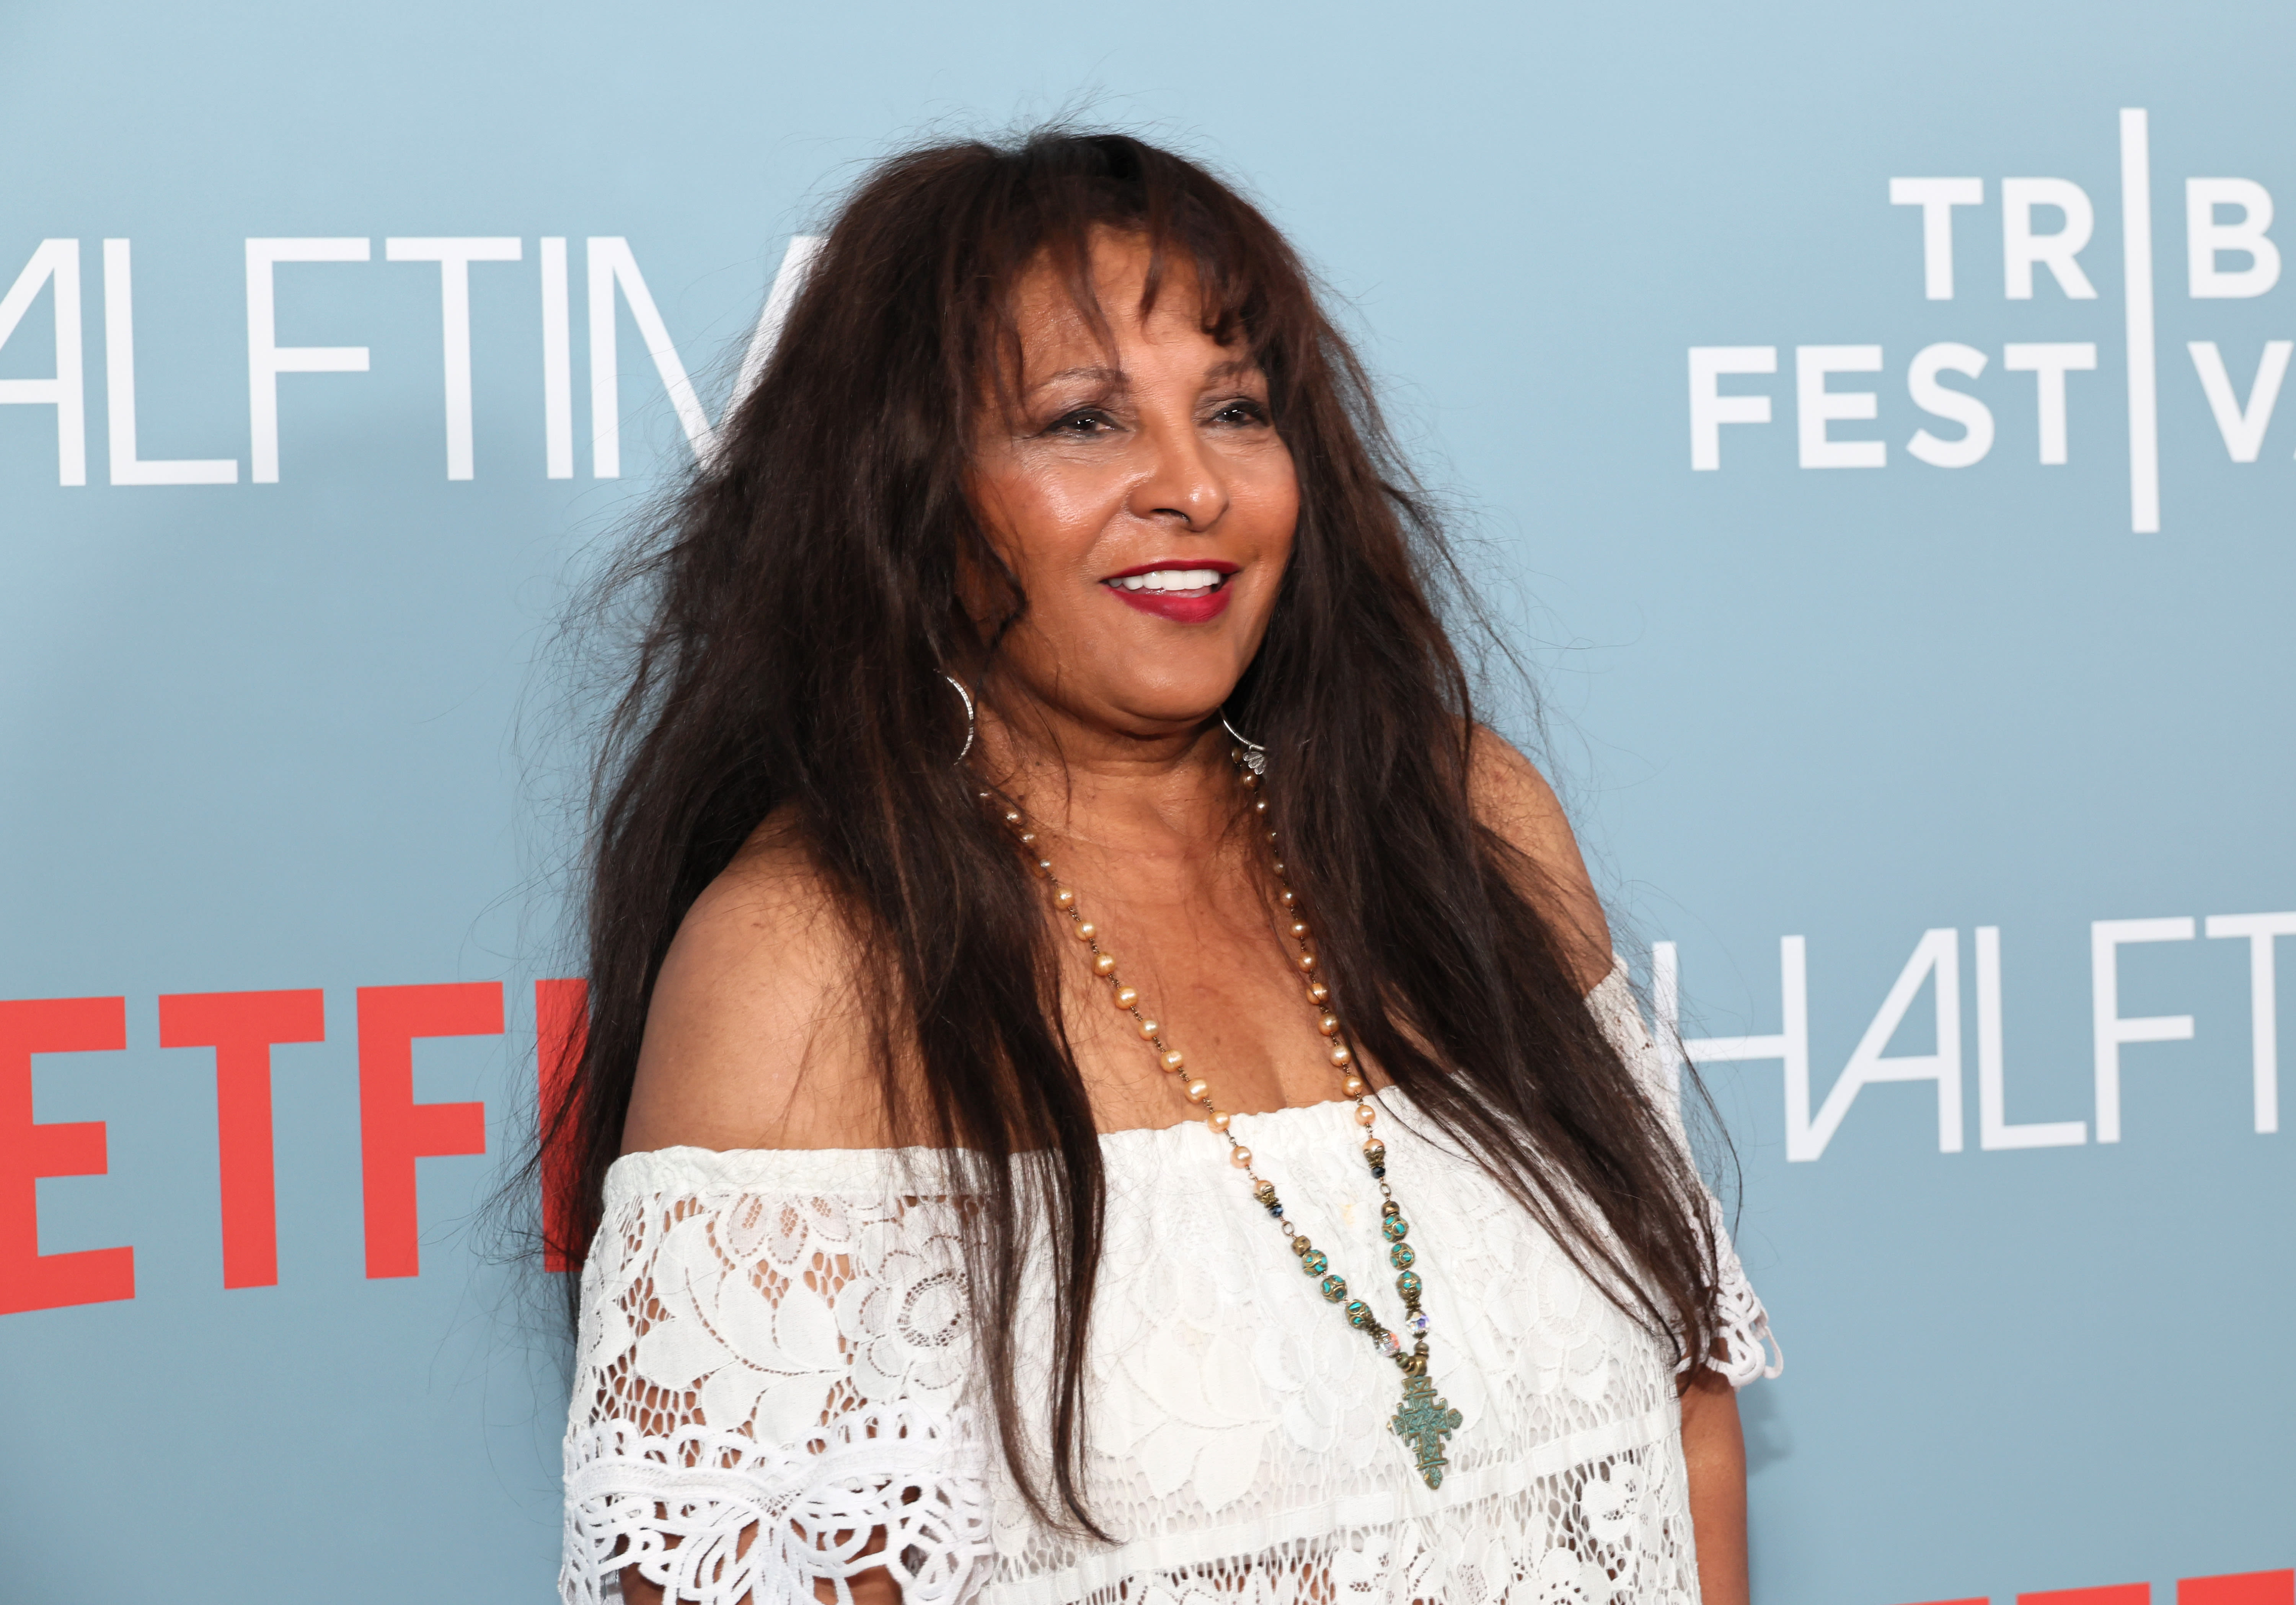 Pam Grier to develop ‘Foxy Brown’ musical, TV series based on her memoir